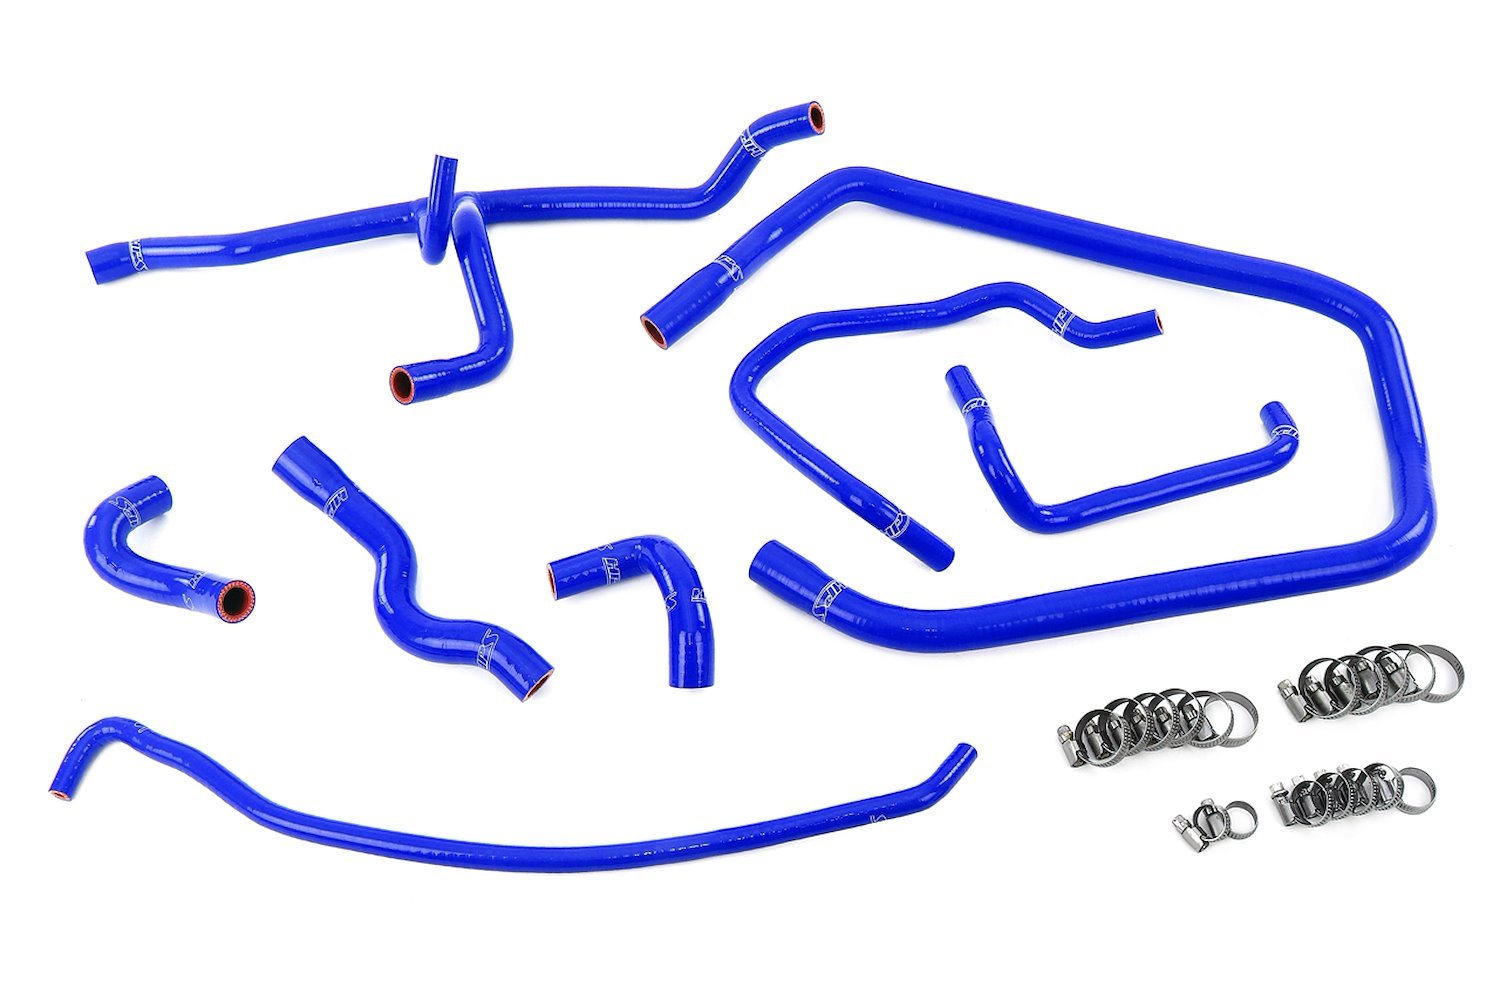 57-2137-BLUE Coolant Hose Kit, 3-Ply Reinforced Silicone, Replaces Heater, Throttle Body, Expansion Tank Hoses